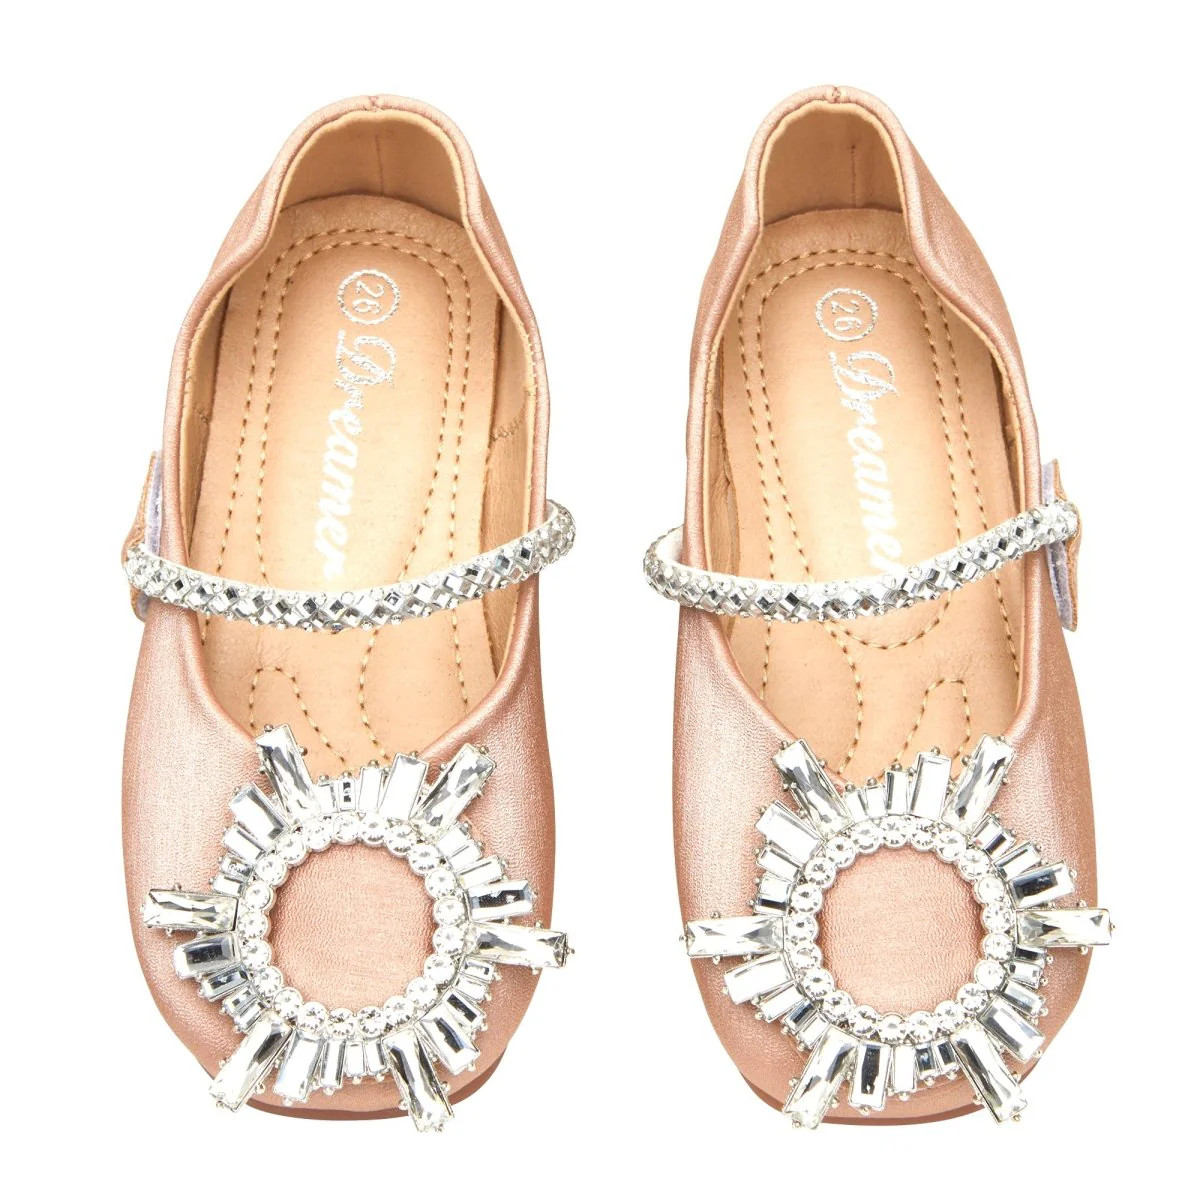 Alaia
        
          Round
        
          Crystal
        
          Shoes | Mini Dreamers 